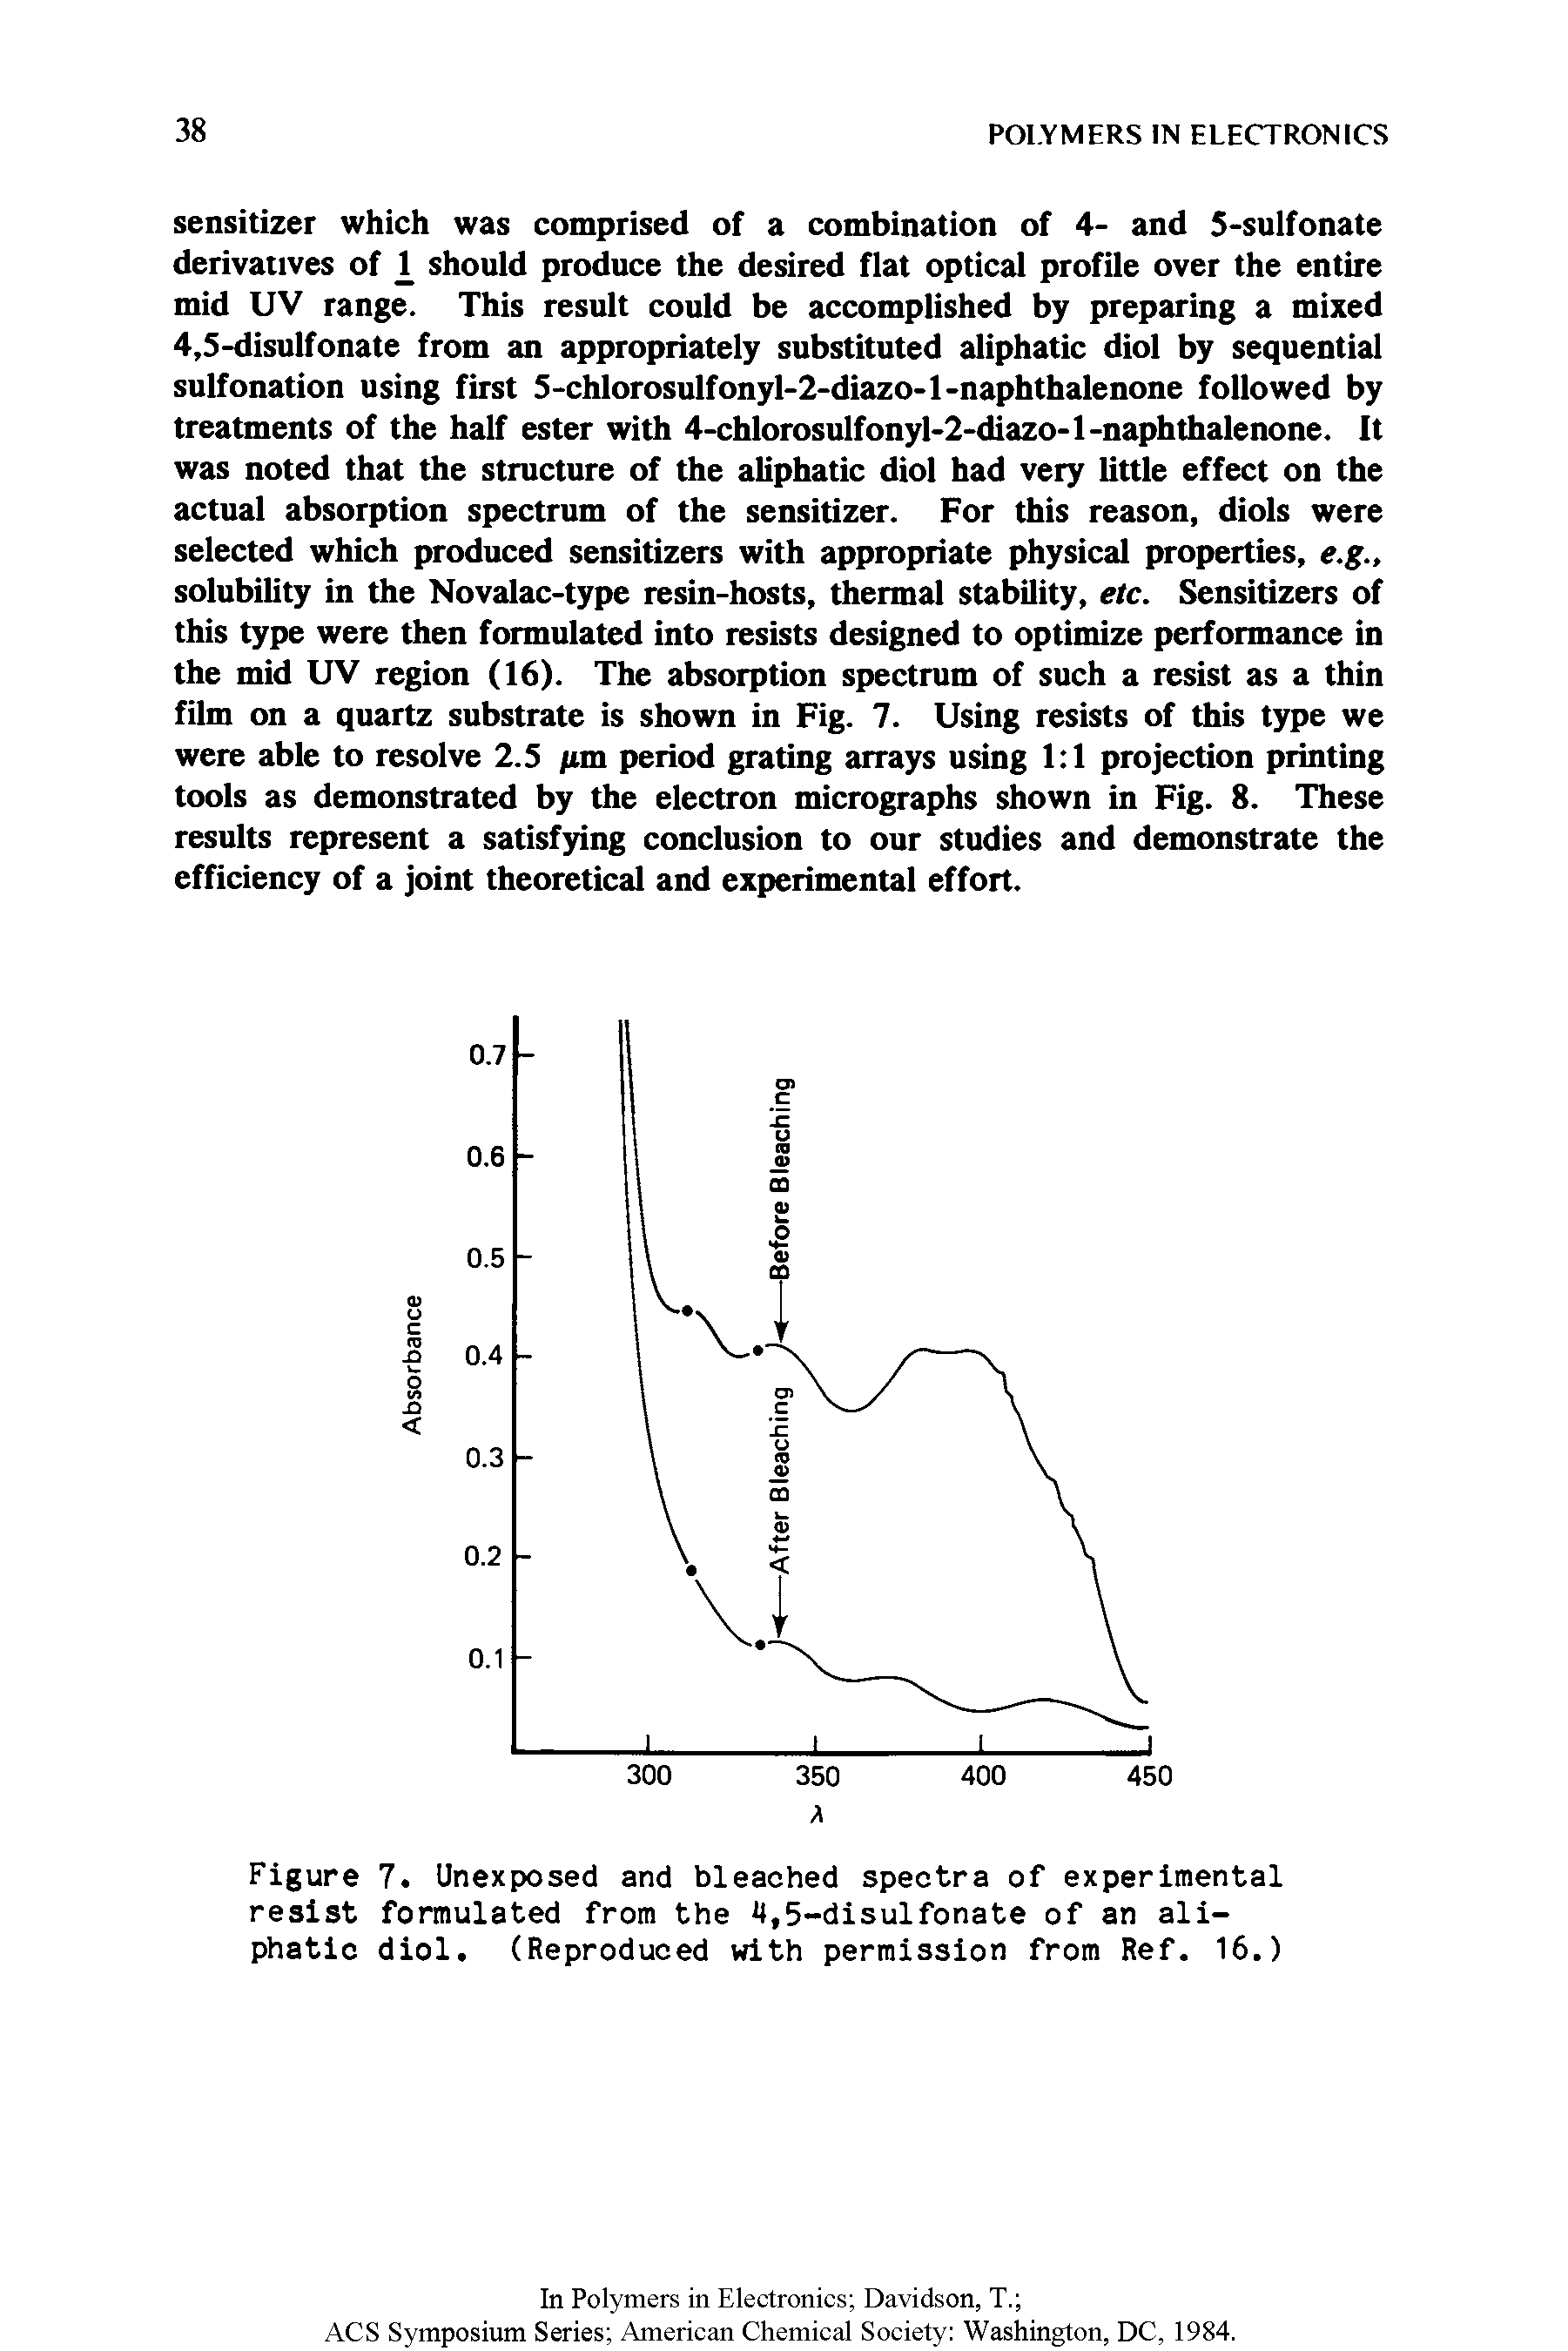 Figure 7. Unexposed and bleached spectra of experimental resist formulated from the 4,5-disulfonate of an aliphatic diol. (Reproduced with permission from Ref. 16.)...